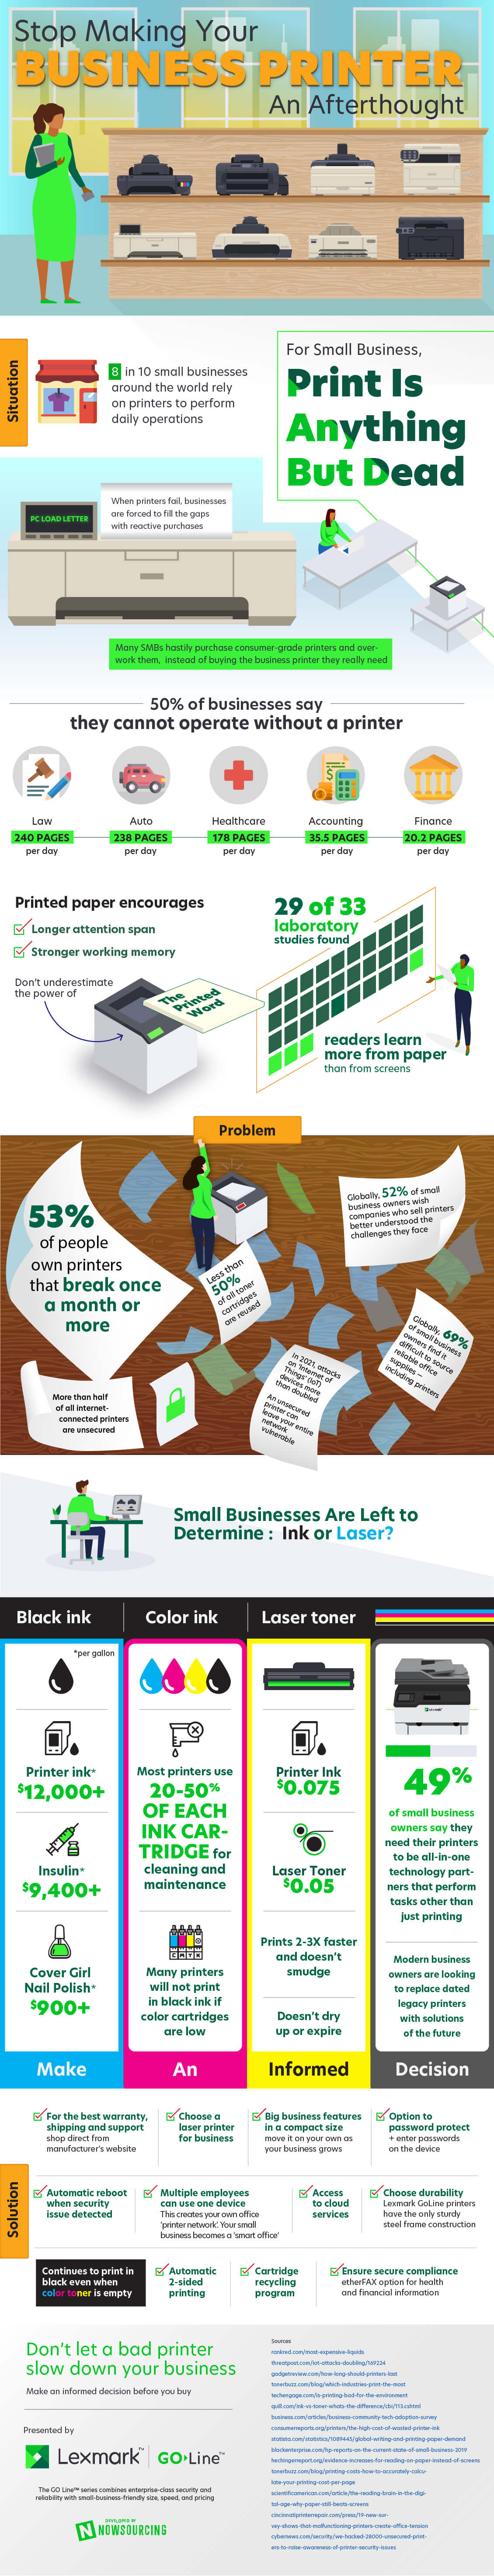 How to choose a printer for small business? Laser vs ink? How much your new, local business will print? See the infographic developed by Nowsourcing for Lexmark GOLine.